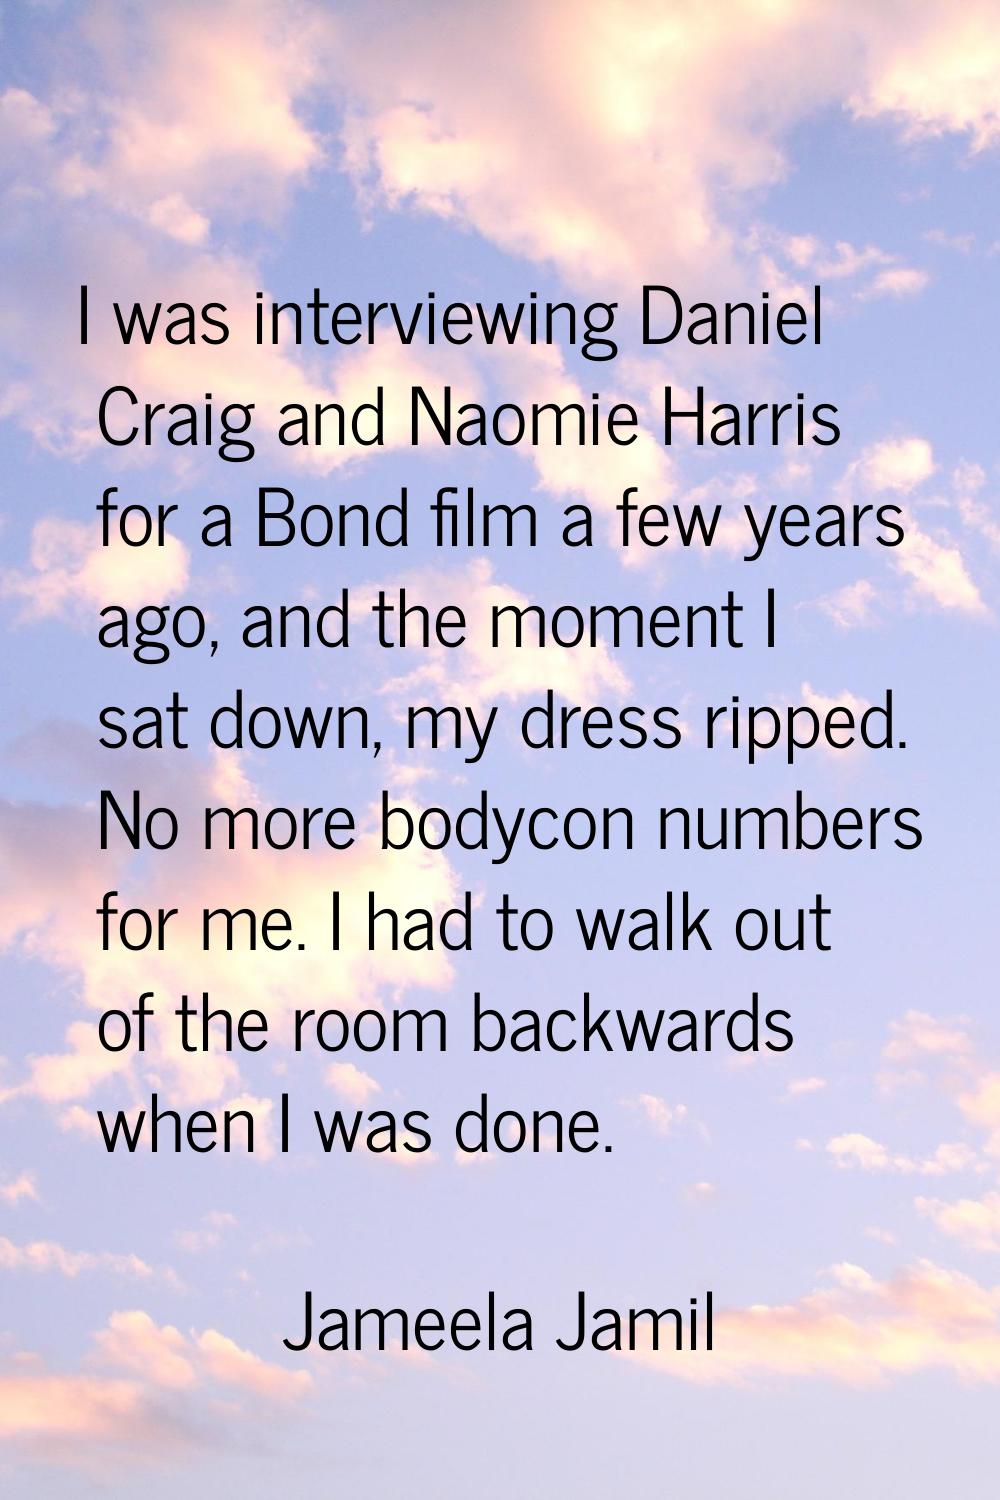 I was interviewing Daniel Craig and Naomie Harris for a Bond film a few years ago, and the moment I